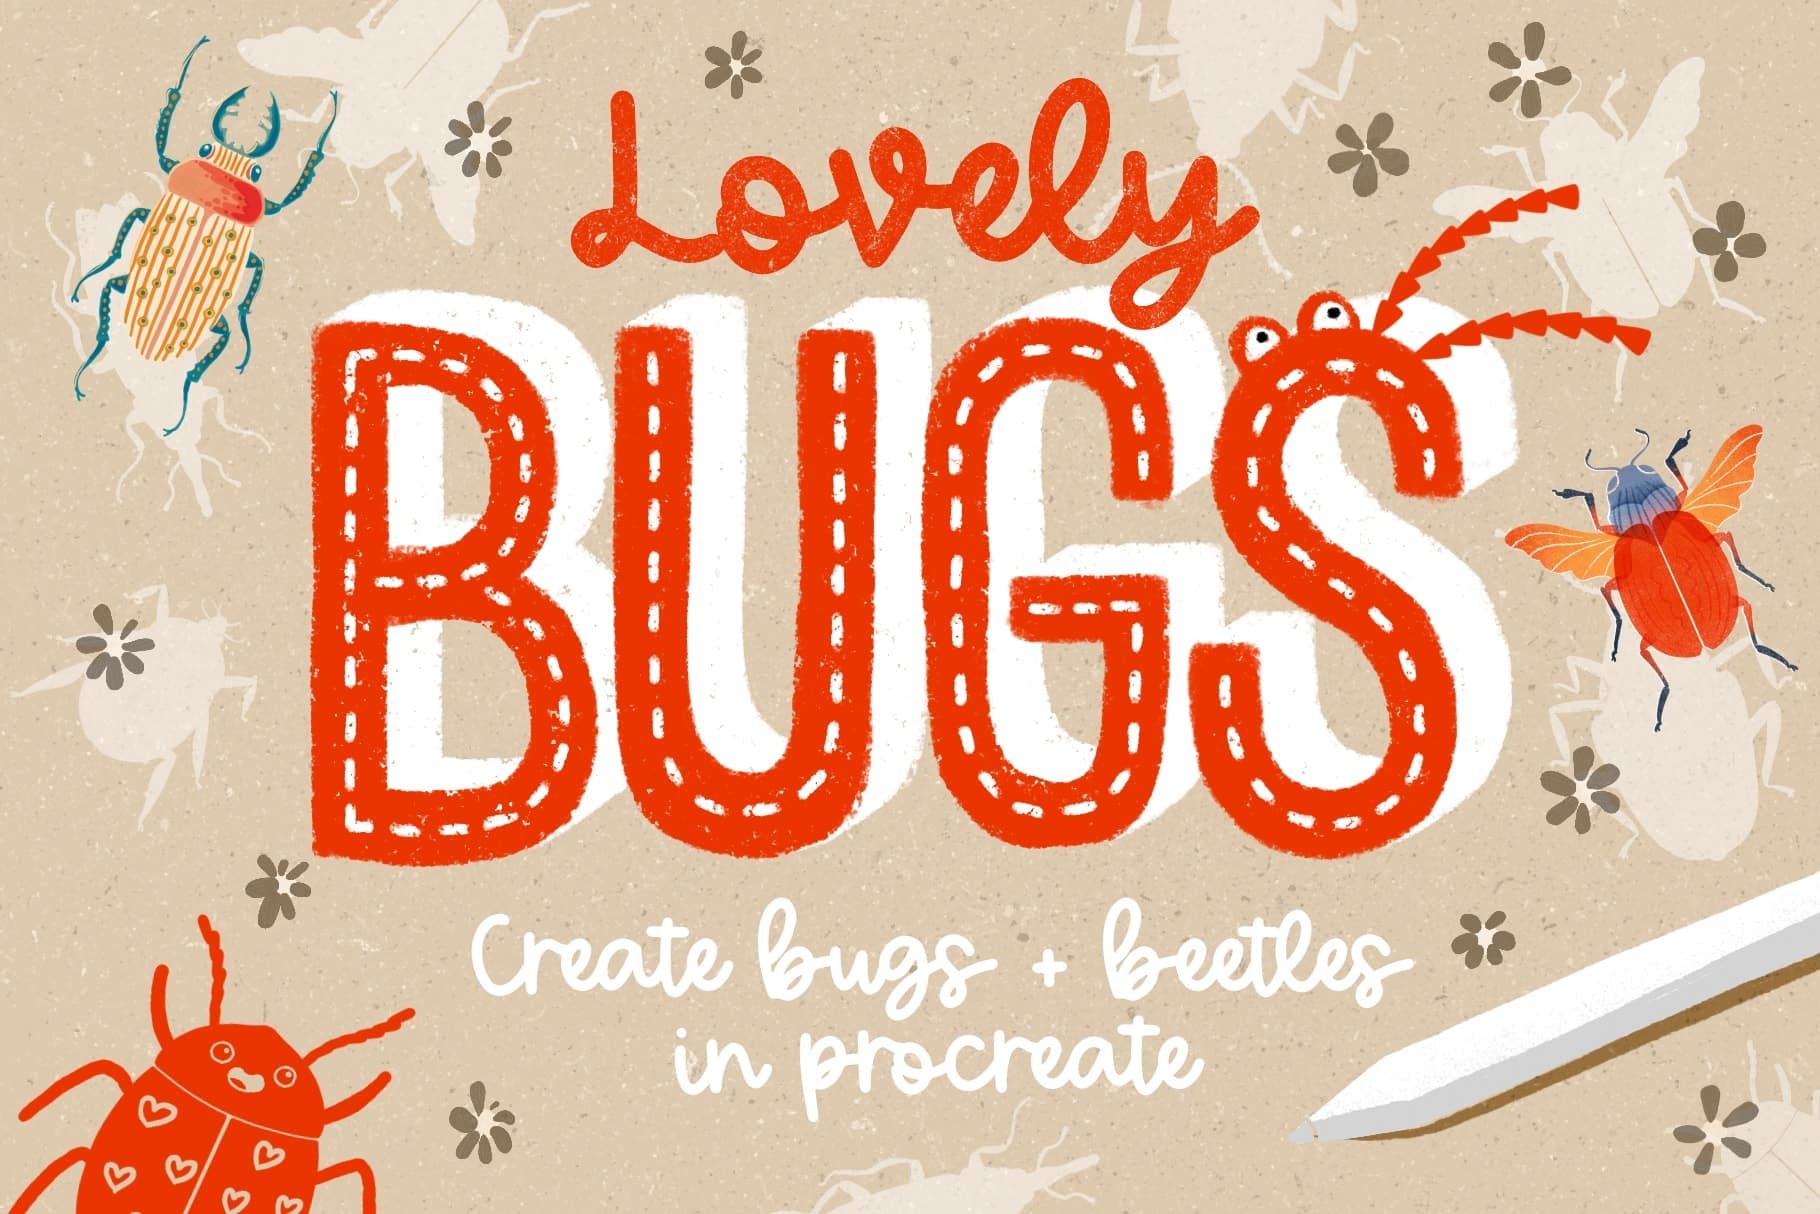 Lovely Bugs Stamp Brushes for Procreate